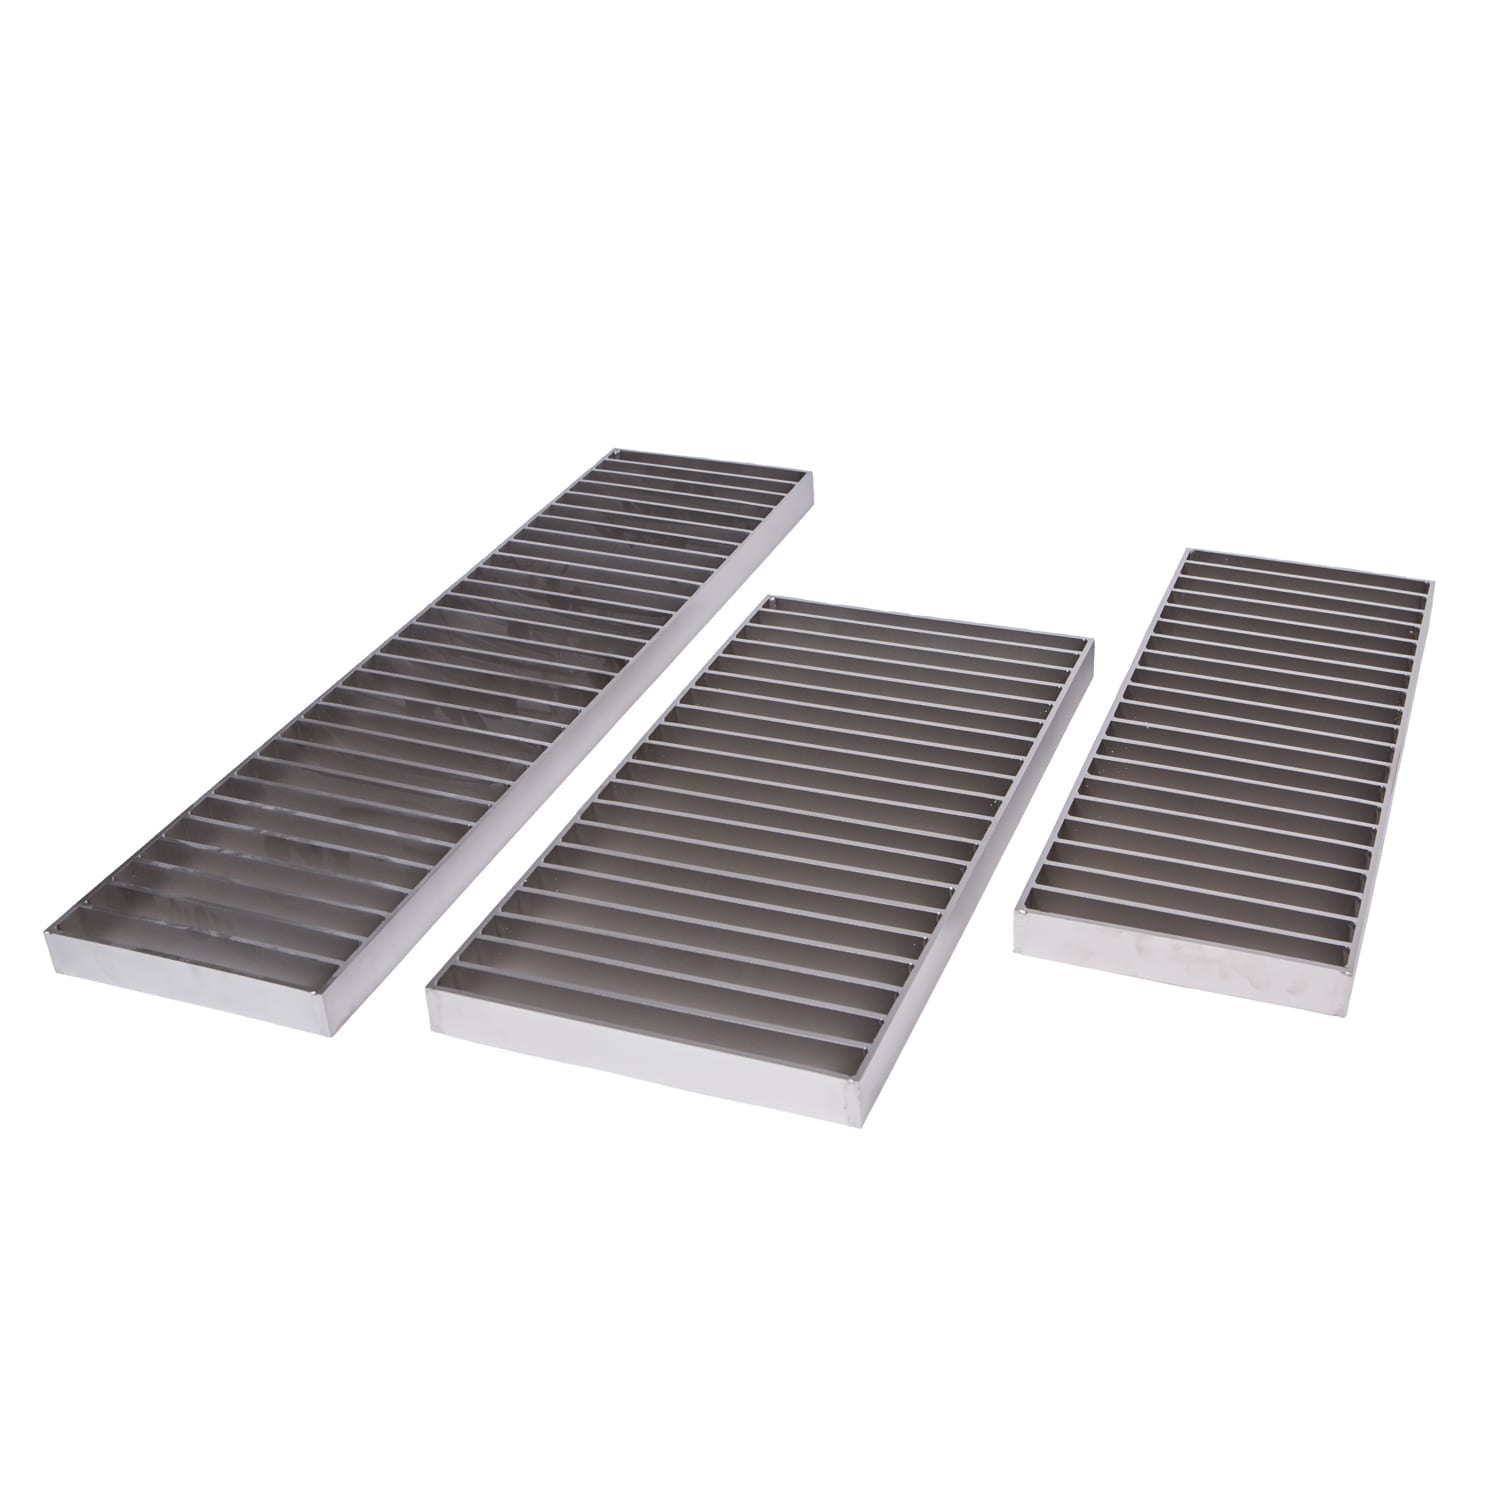 Stainless Steel Drain Grates - AWI Stainless Steel Trench Drain Grates